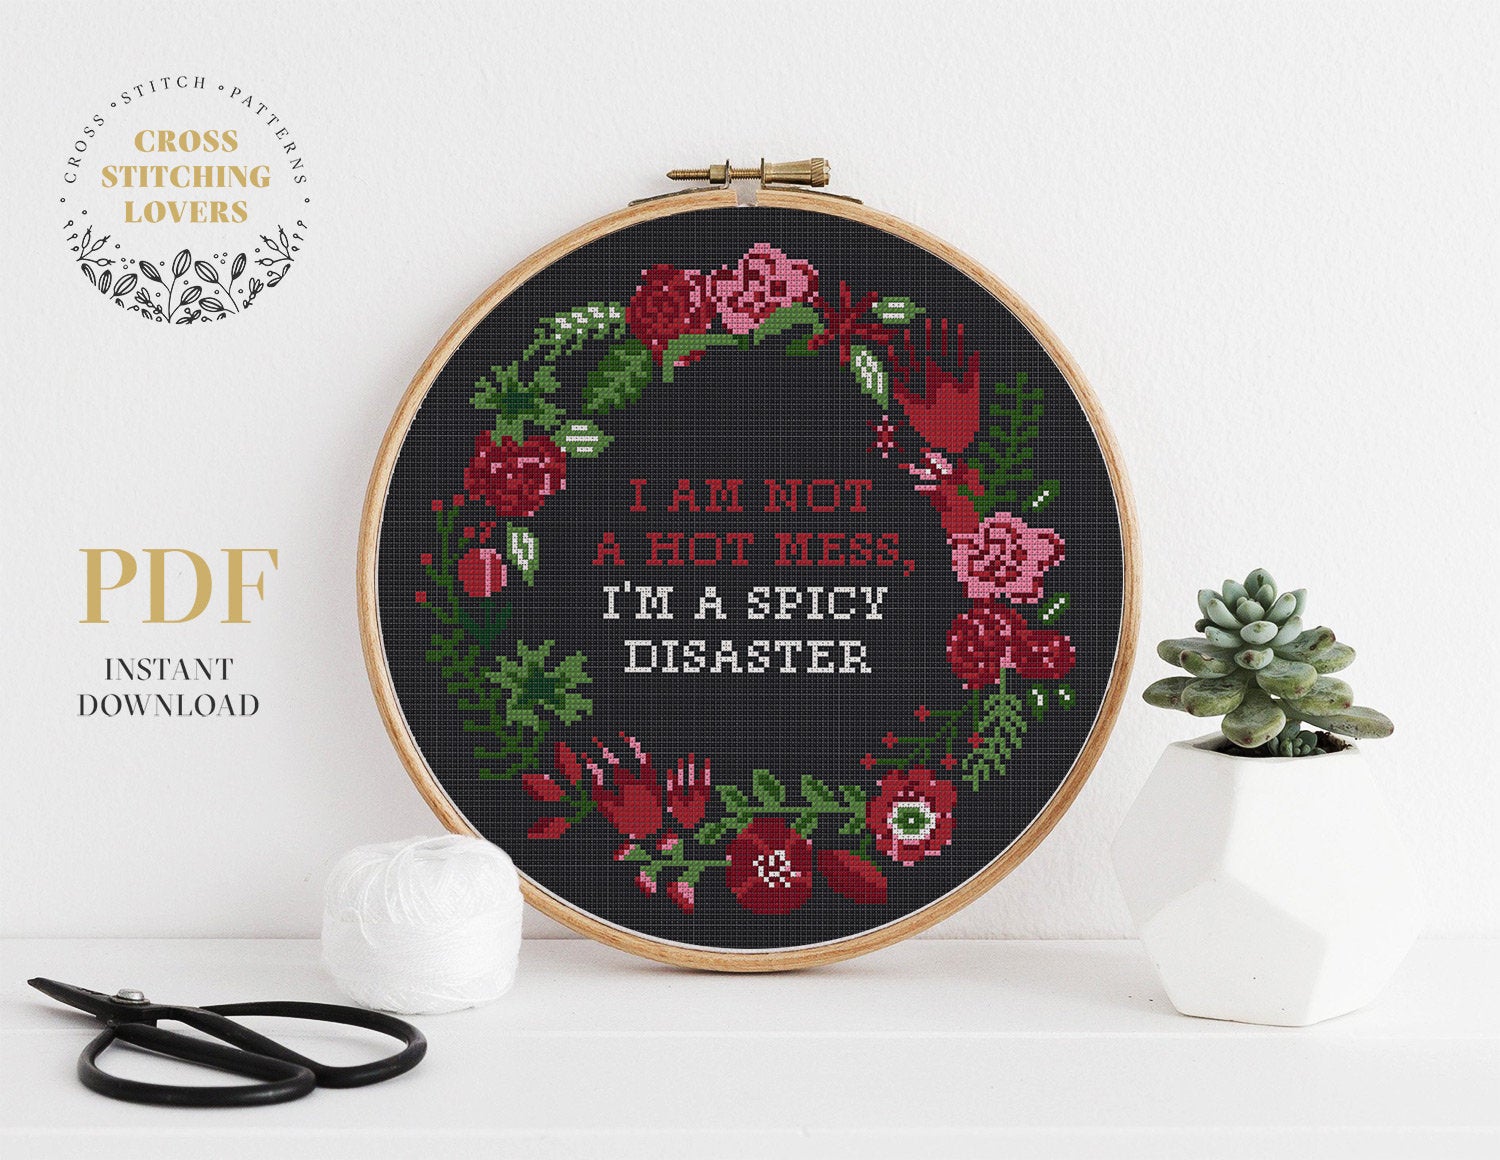 I’m not a Hot Mess I’m a Spicy Disaster - Cross stitch pattern